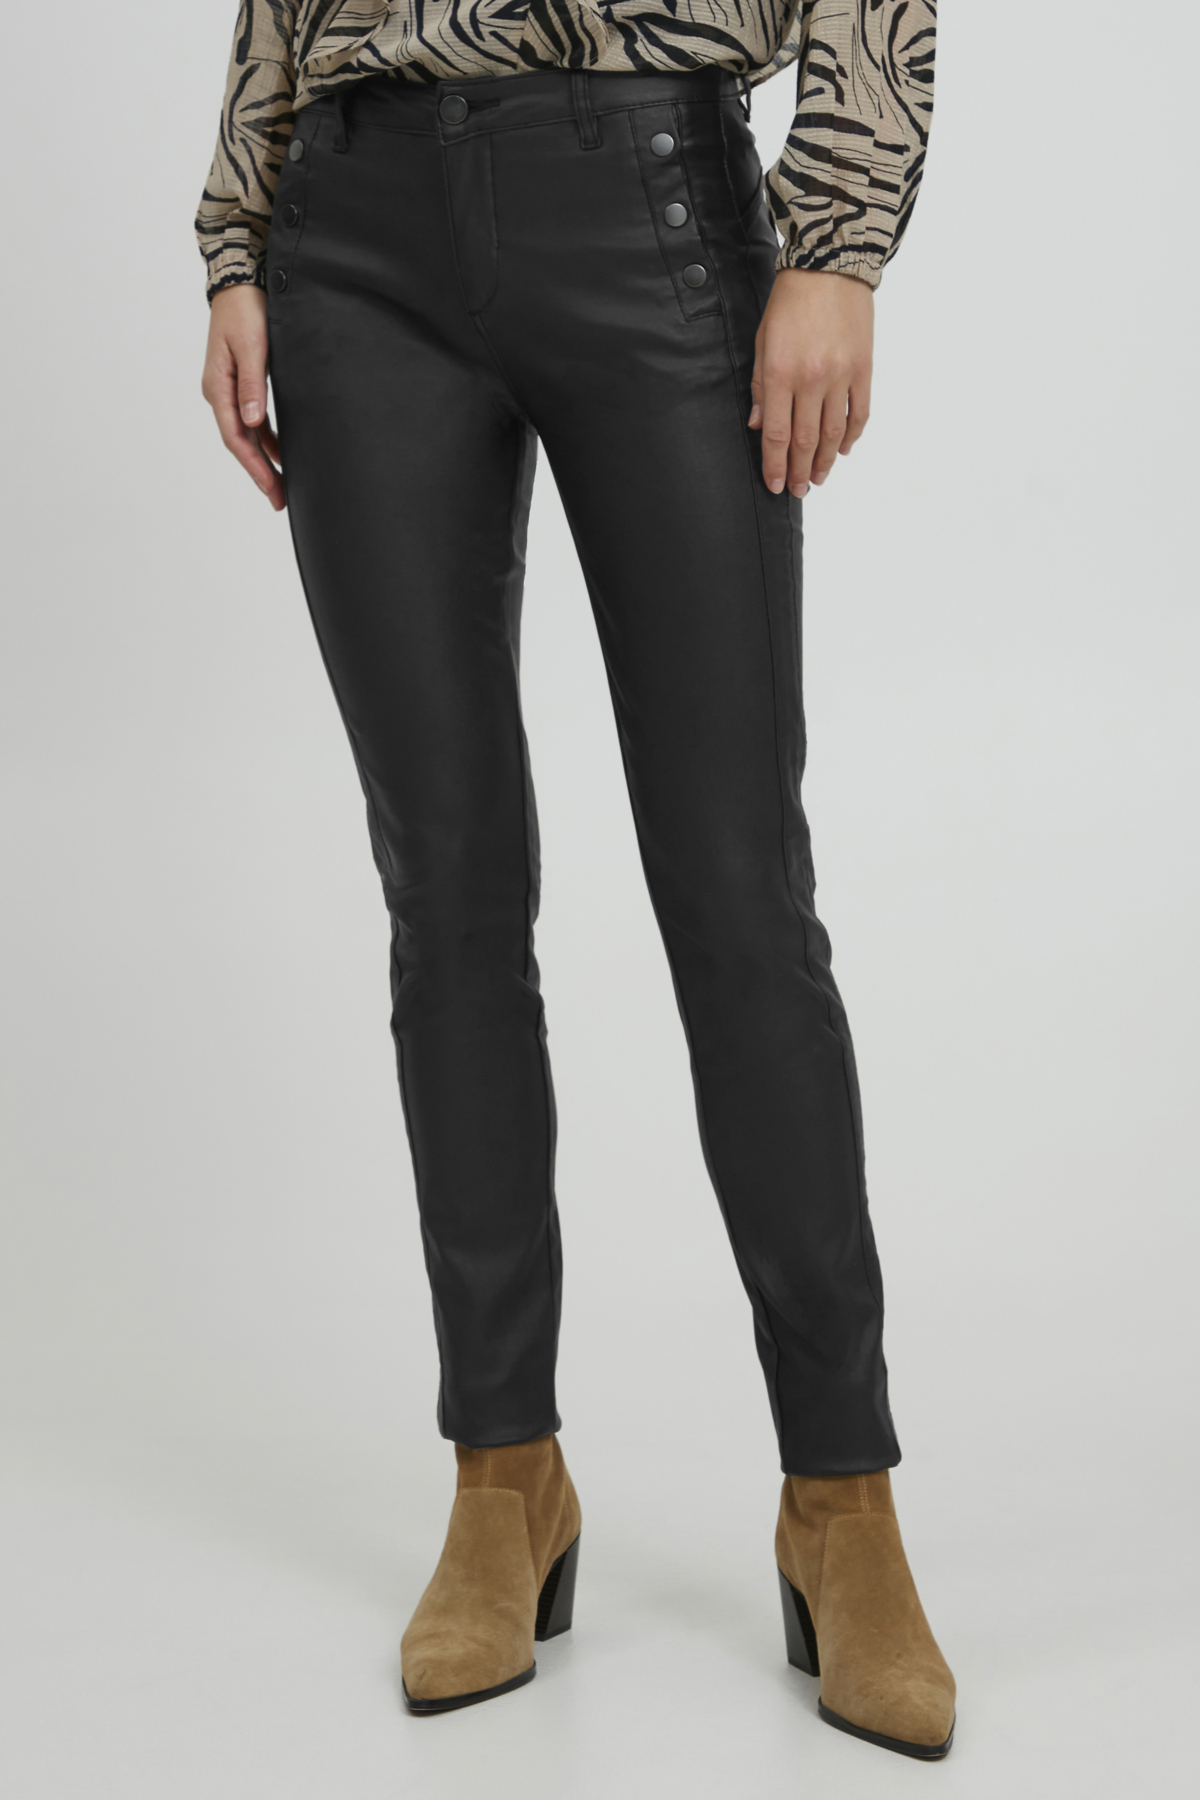 Fransa Frdotalin Pants & Jeans - By Haugsted - Bukser